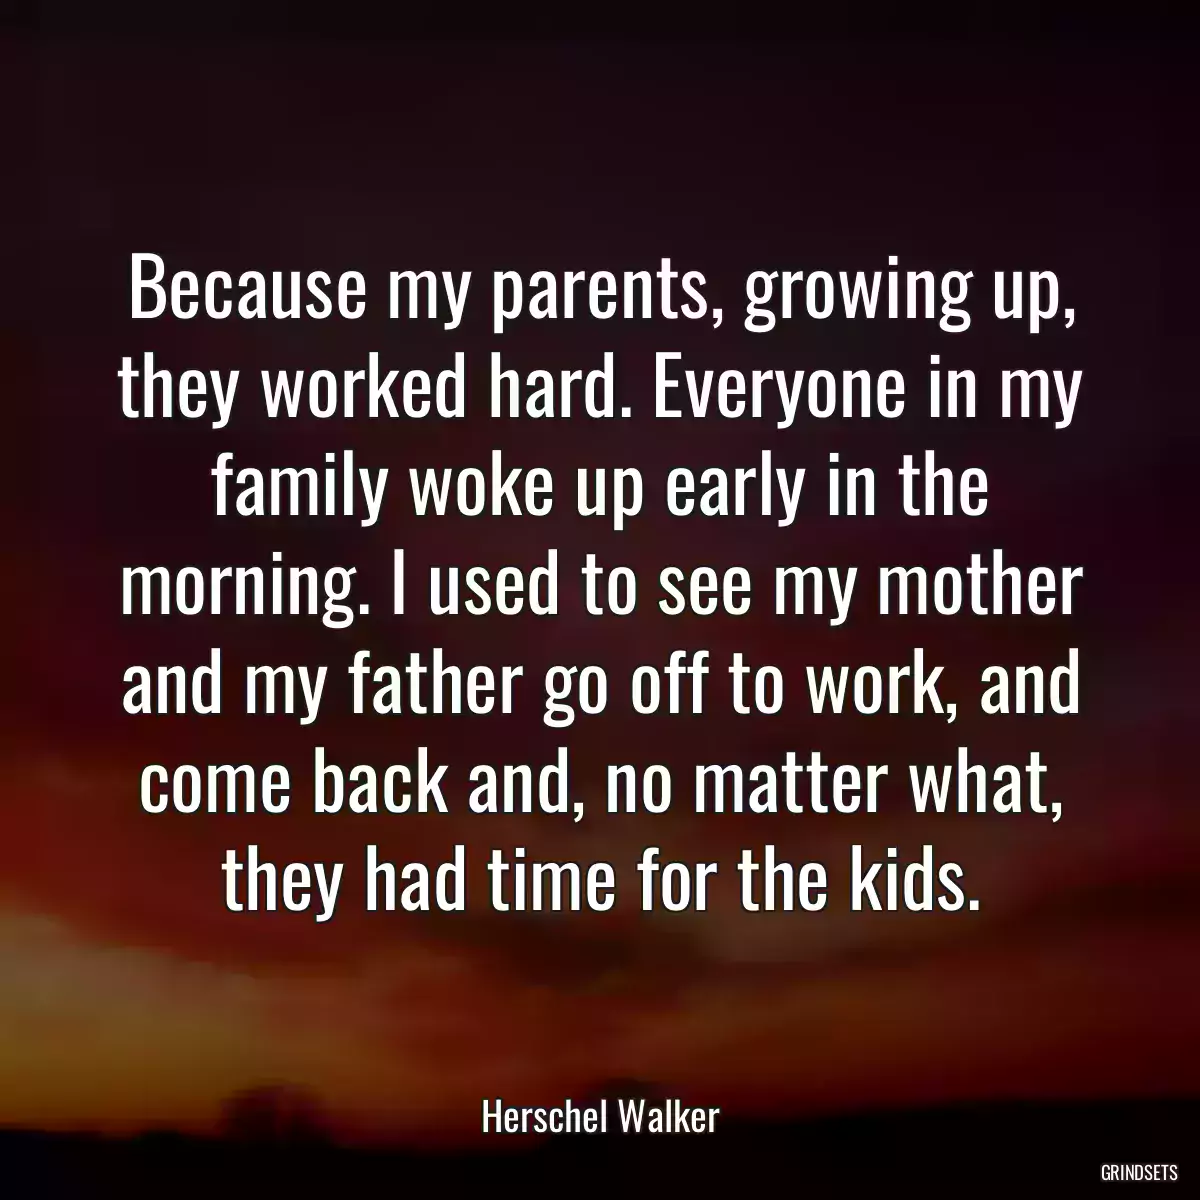 Because my parents, growing up, they worked hard. Everyone in my family woke up early in the morning. I used to see my mother and my father go off to work, and come back and, no matter what, they had time for the kids.